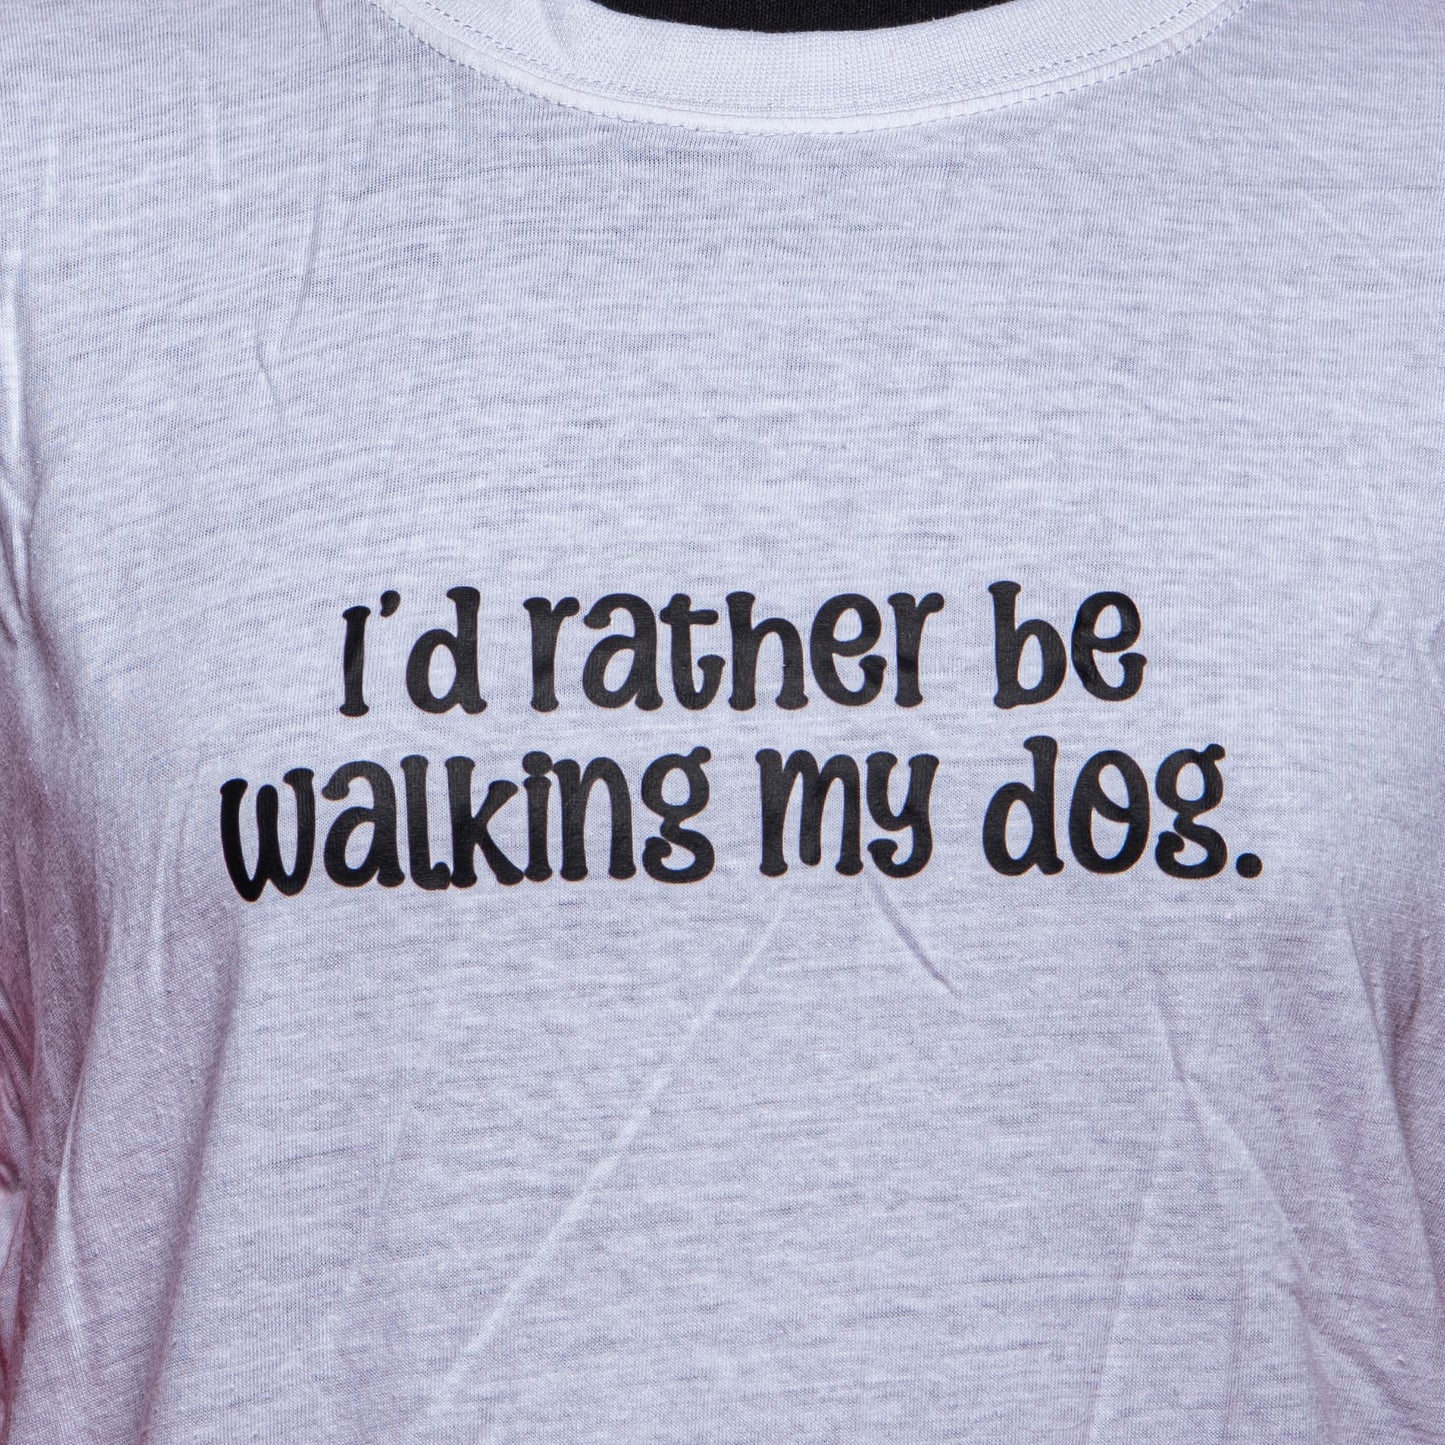 END OF LINE I'd Rather Be Walking My Dog - White T-shirt Size Small